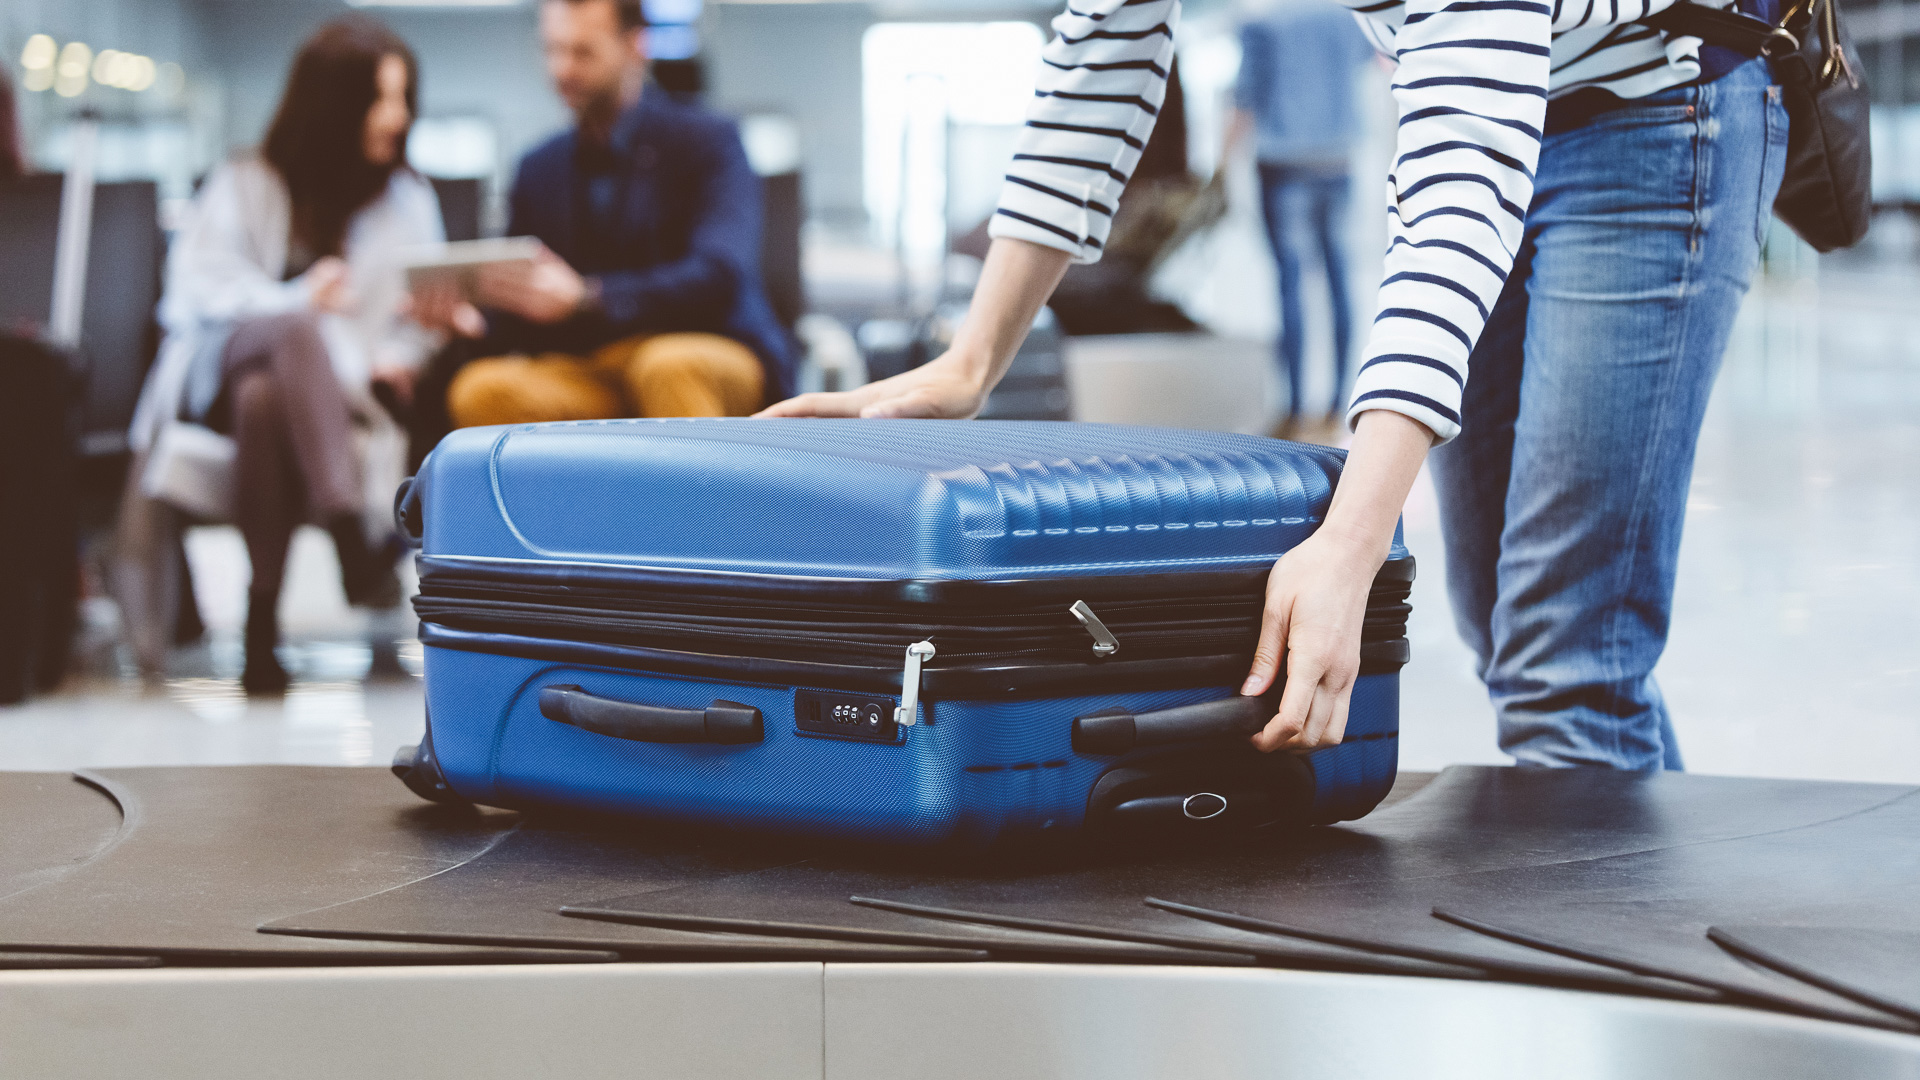 The Easiest Way to Avoid Paying for Checked Luggage